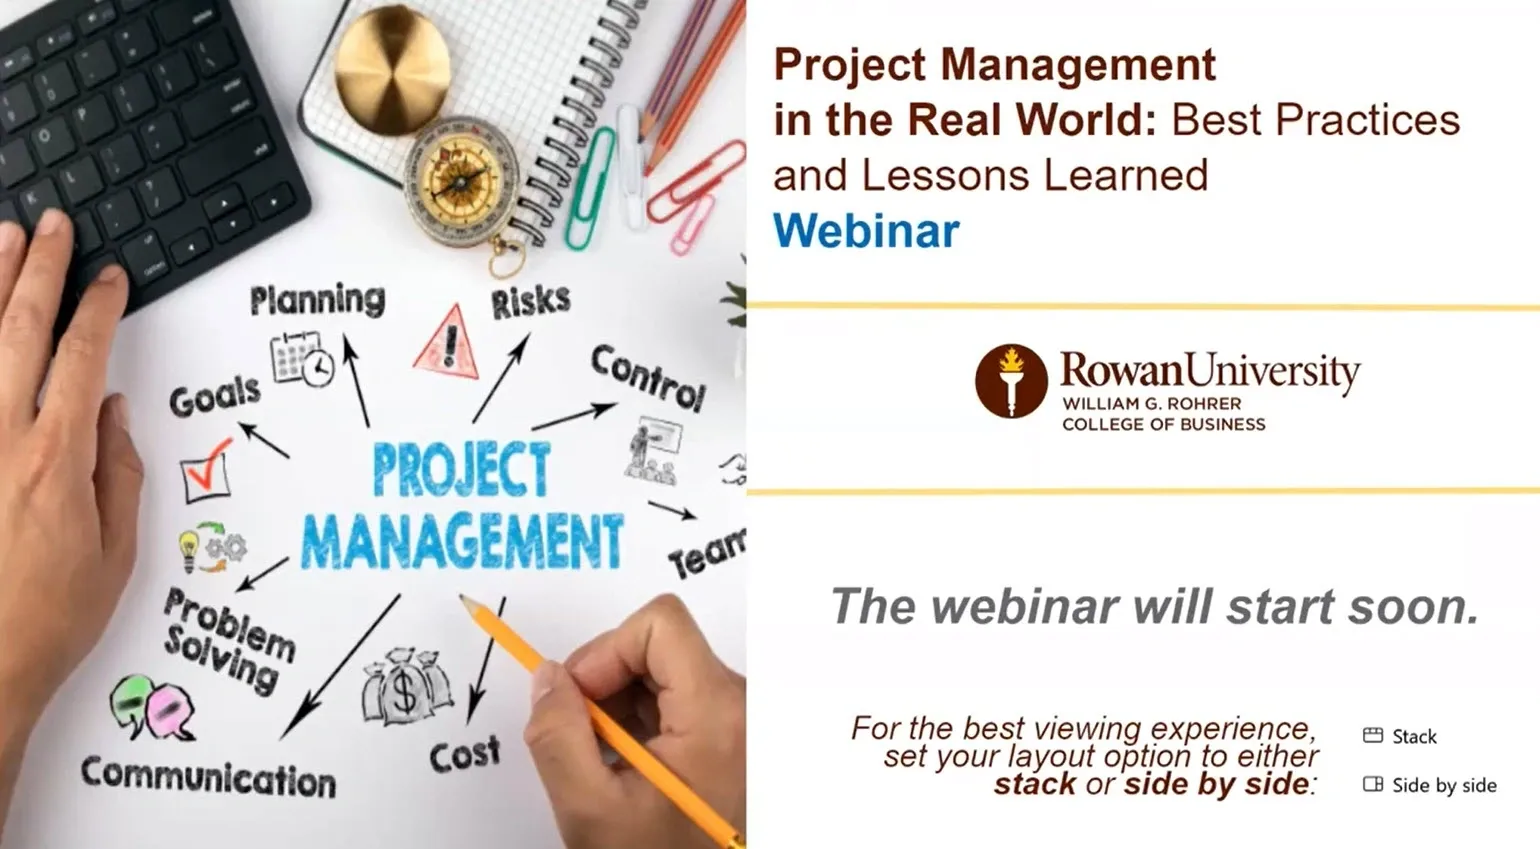 A picture of a project management course and an image of the webinar.